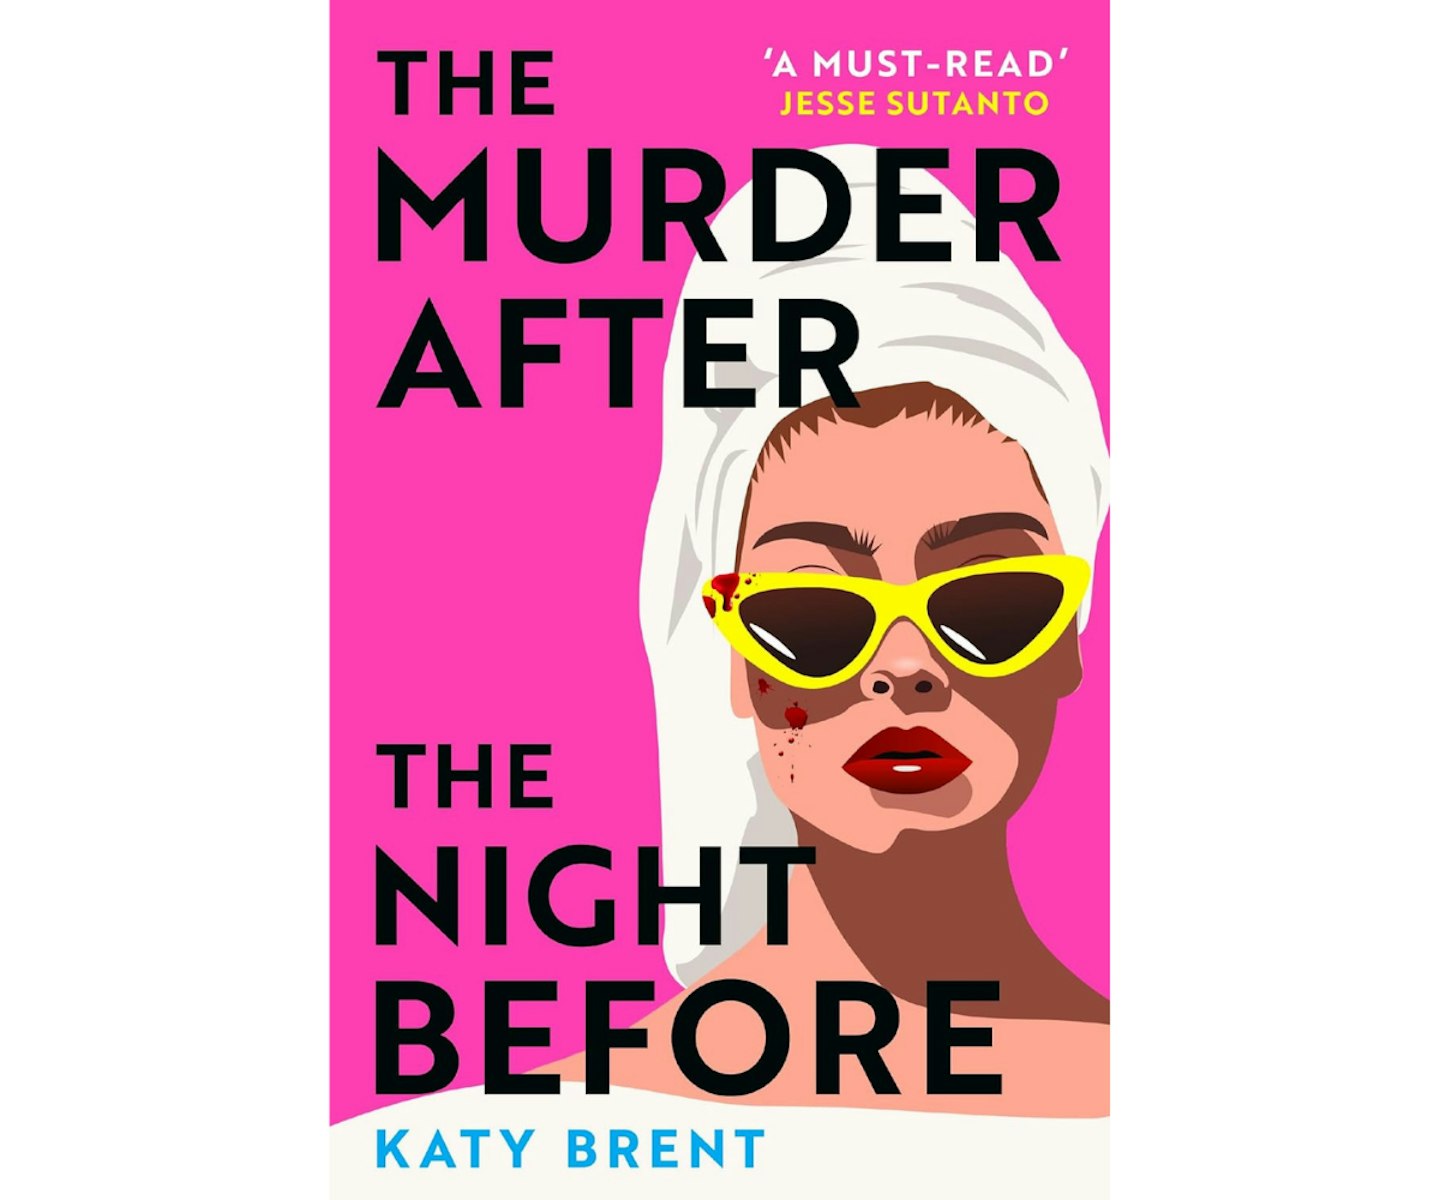 The Murder After The Night Before by Katy Brent